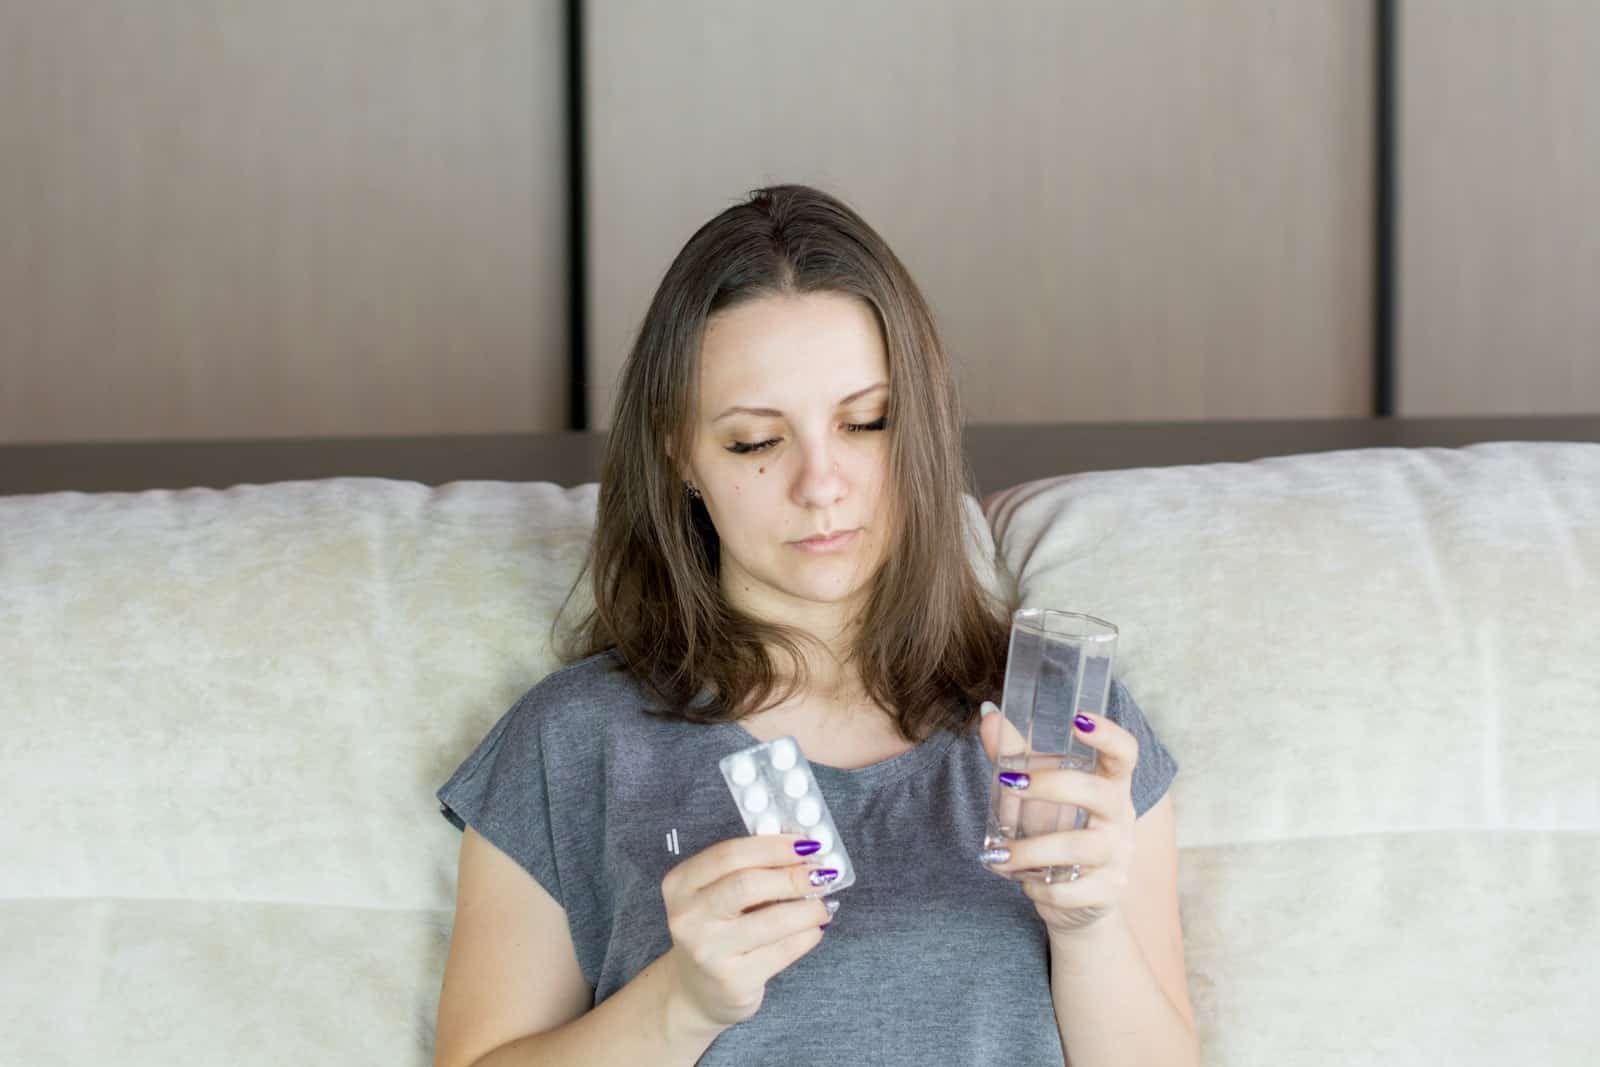 An unwell woman sitting on a couch looking at her medications